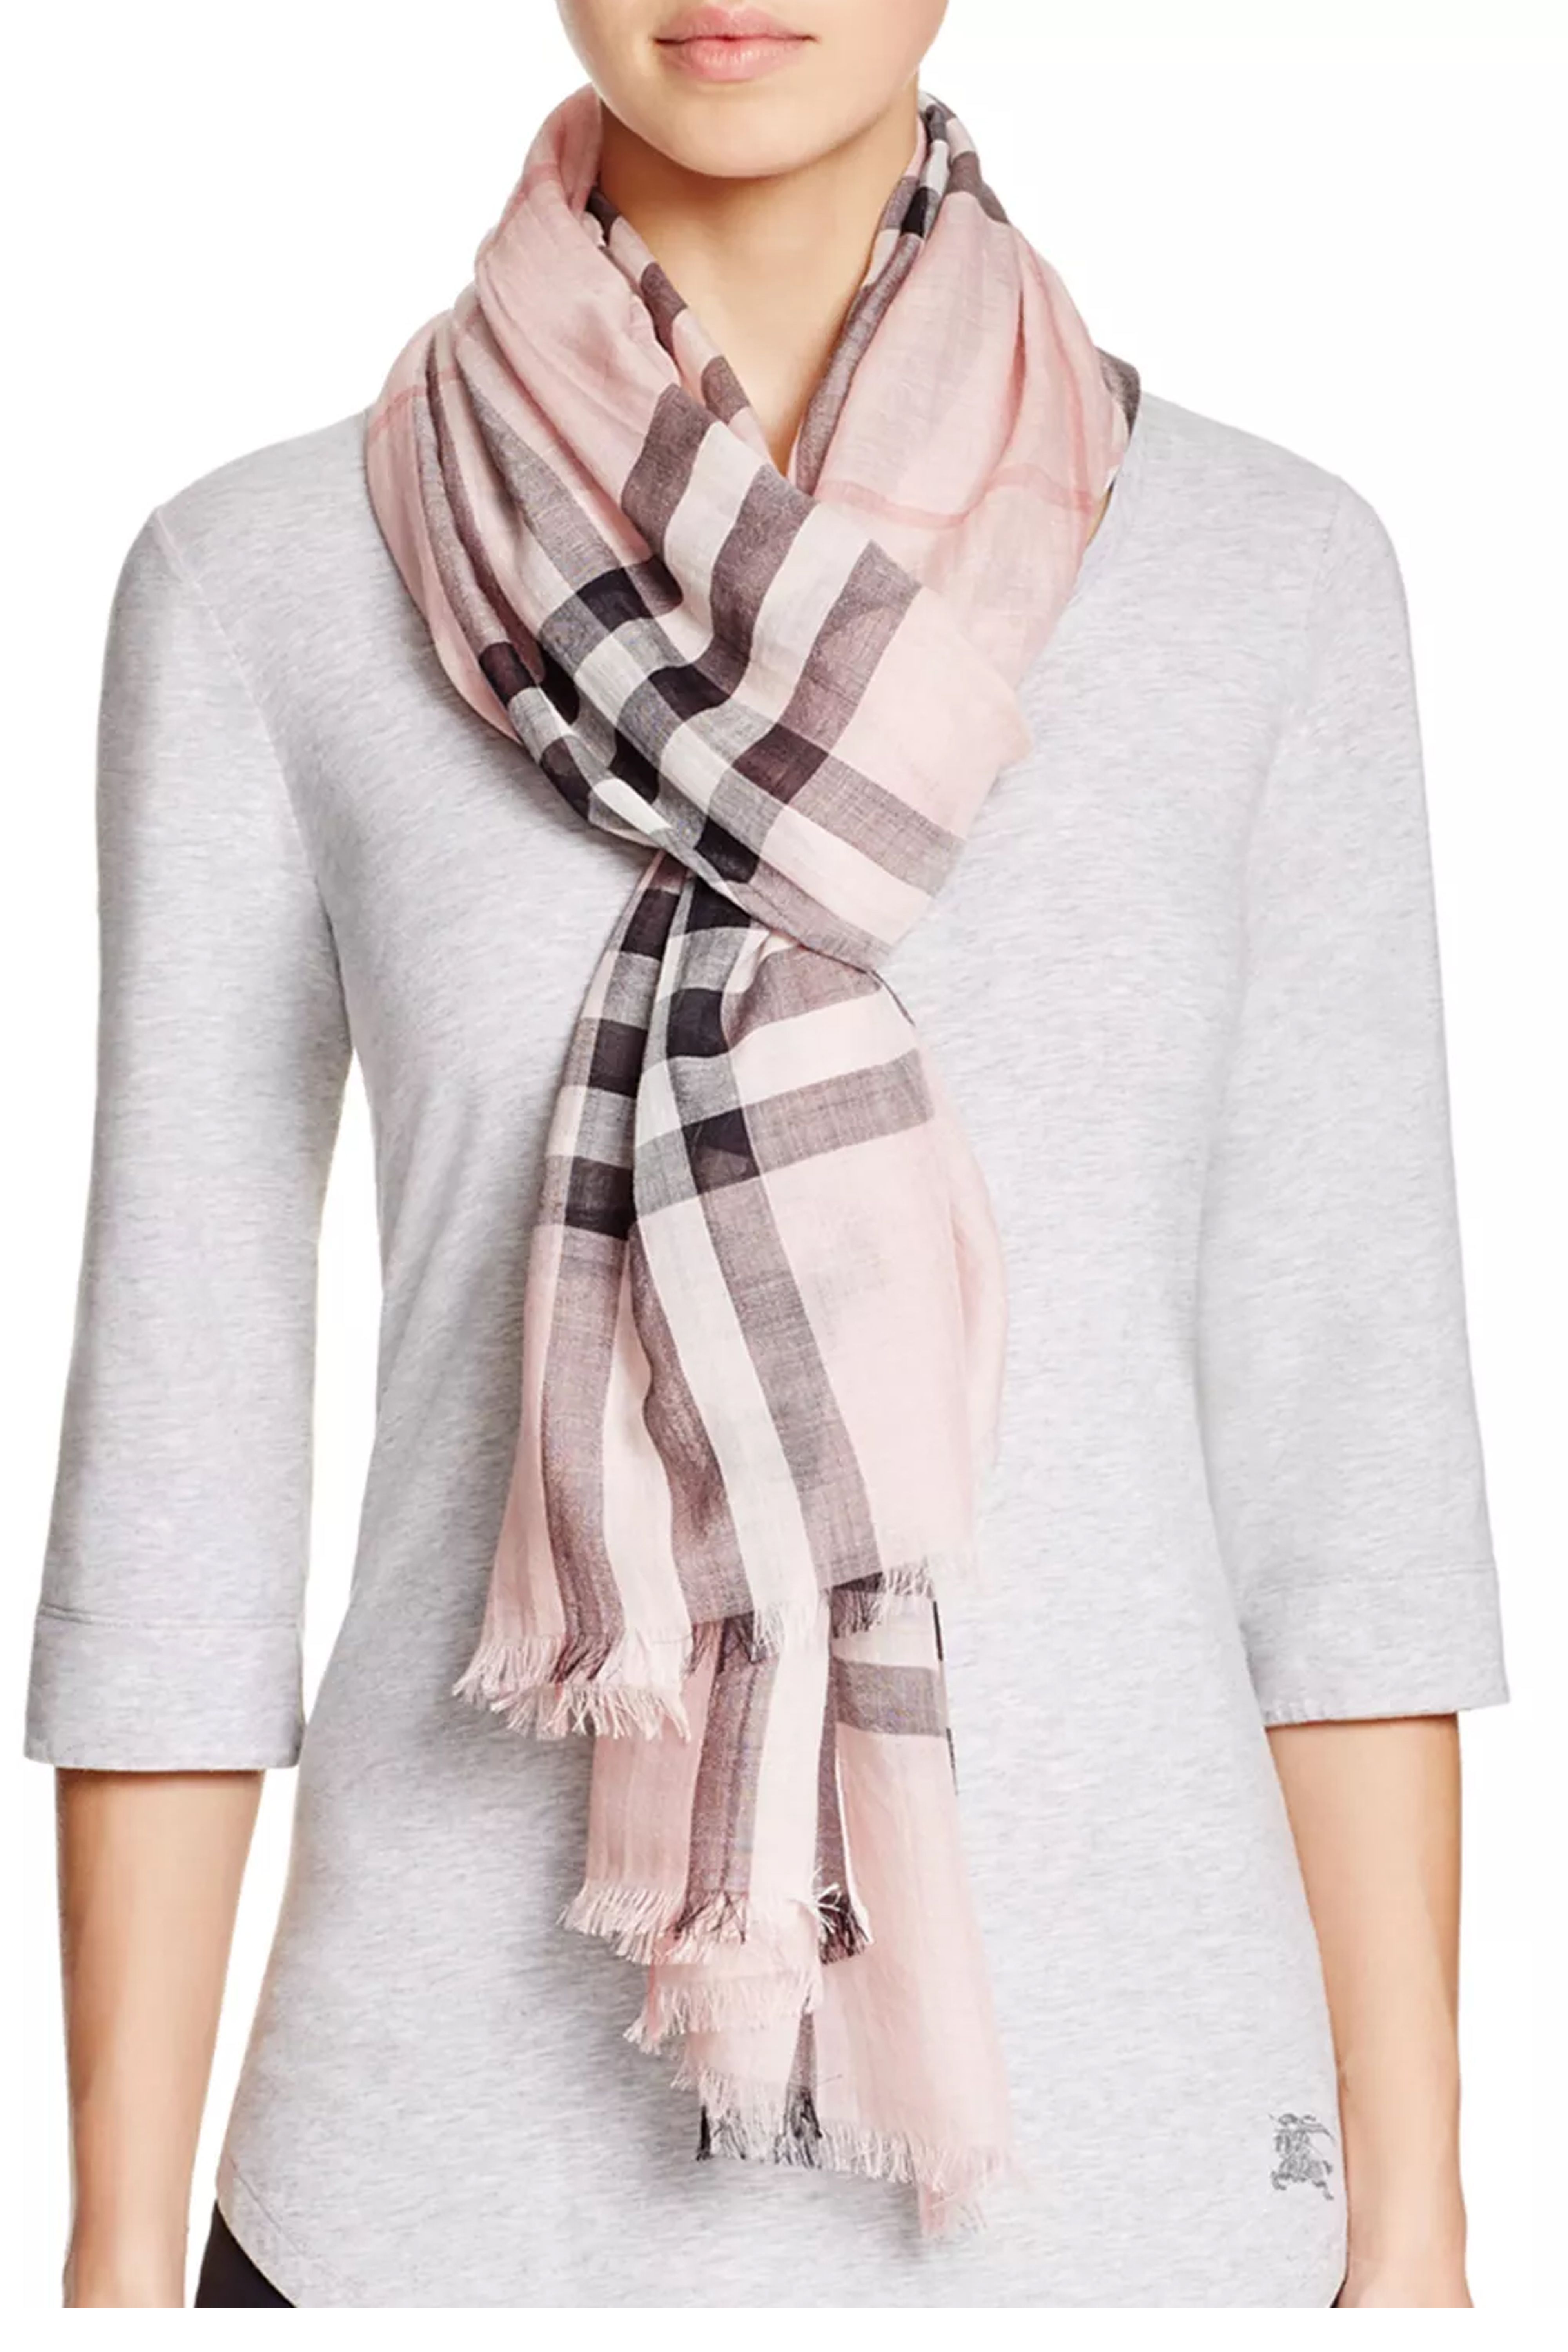 burberry style scarf